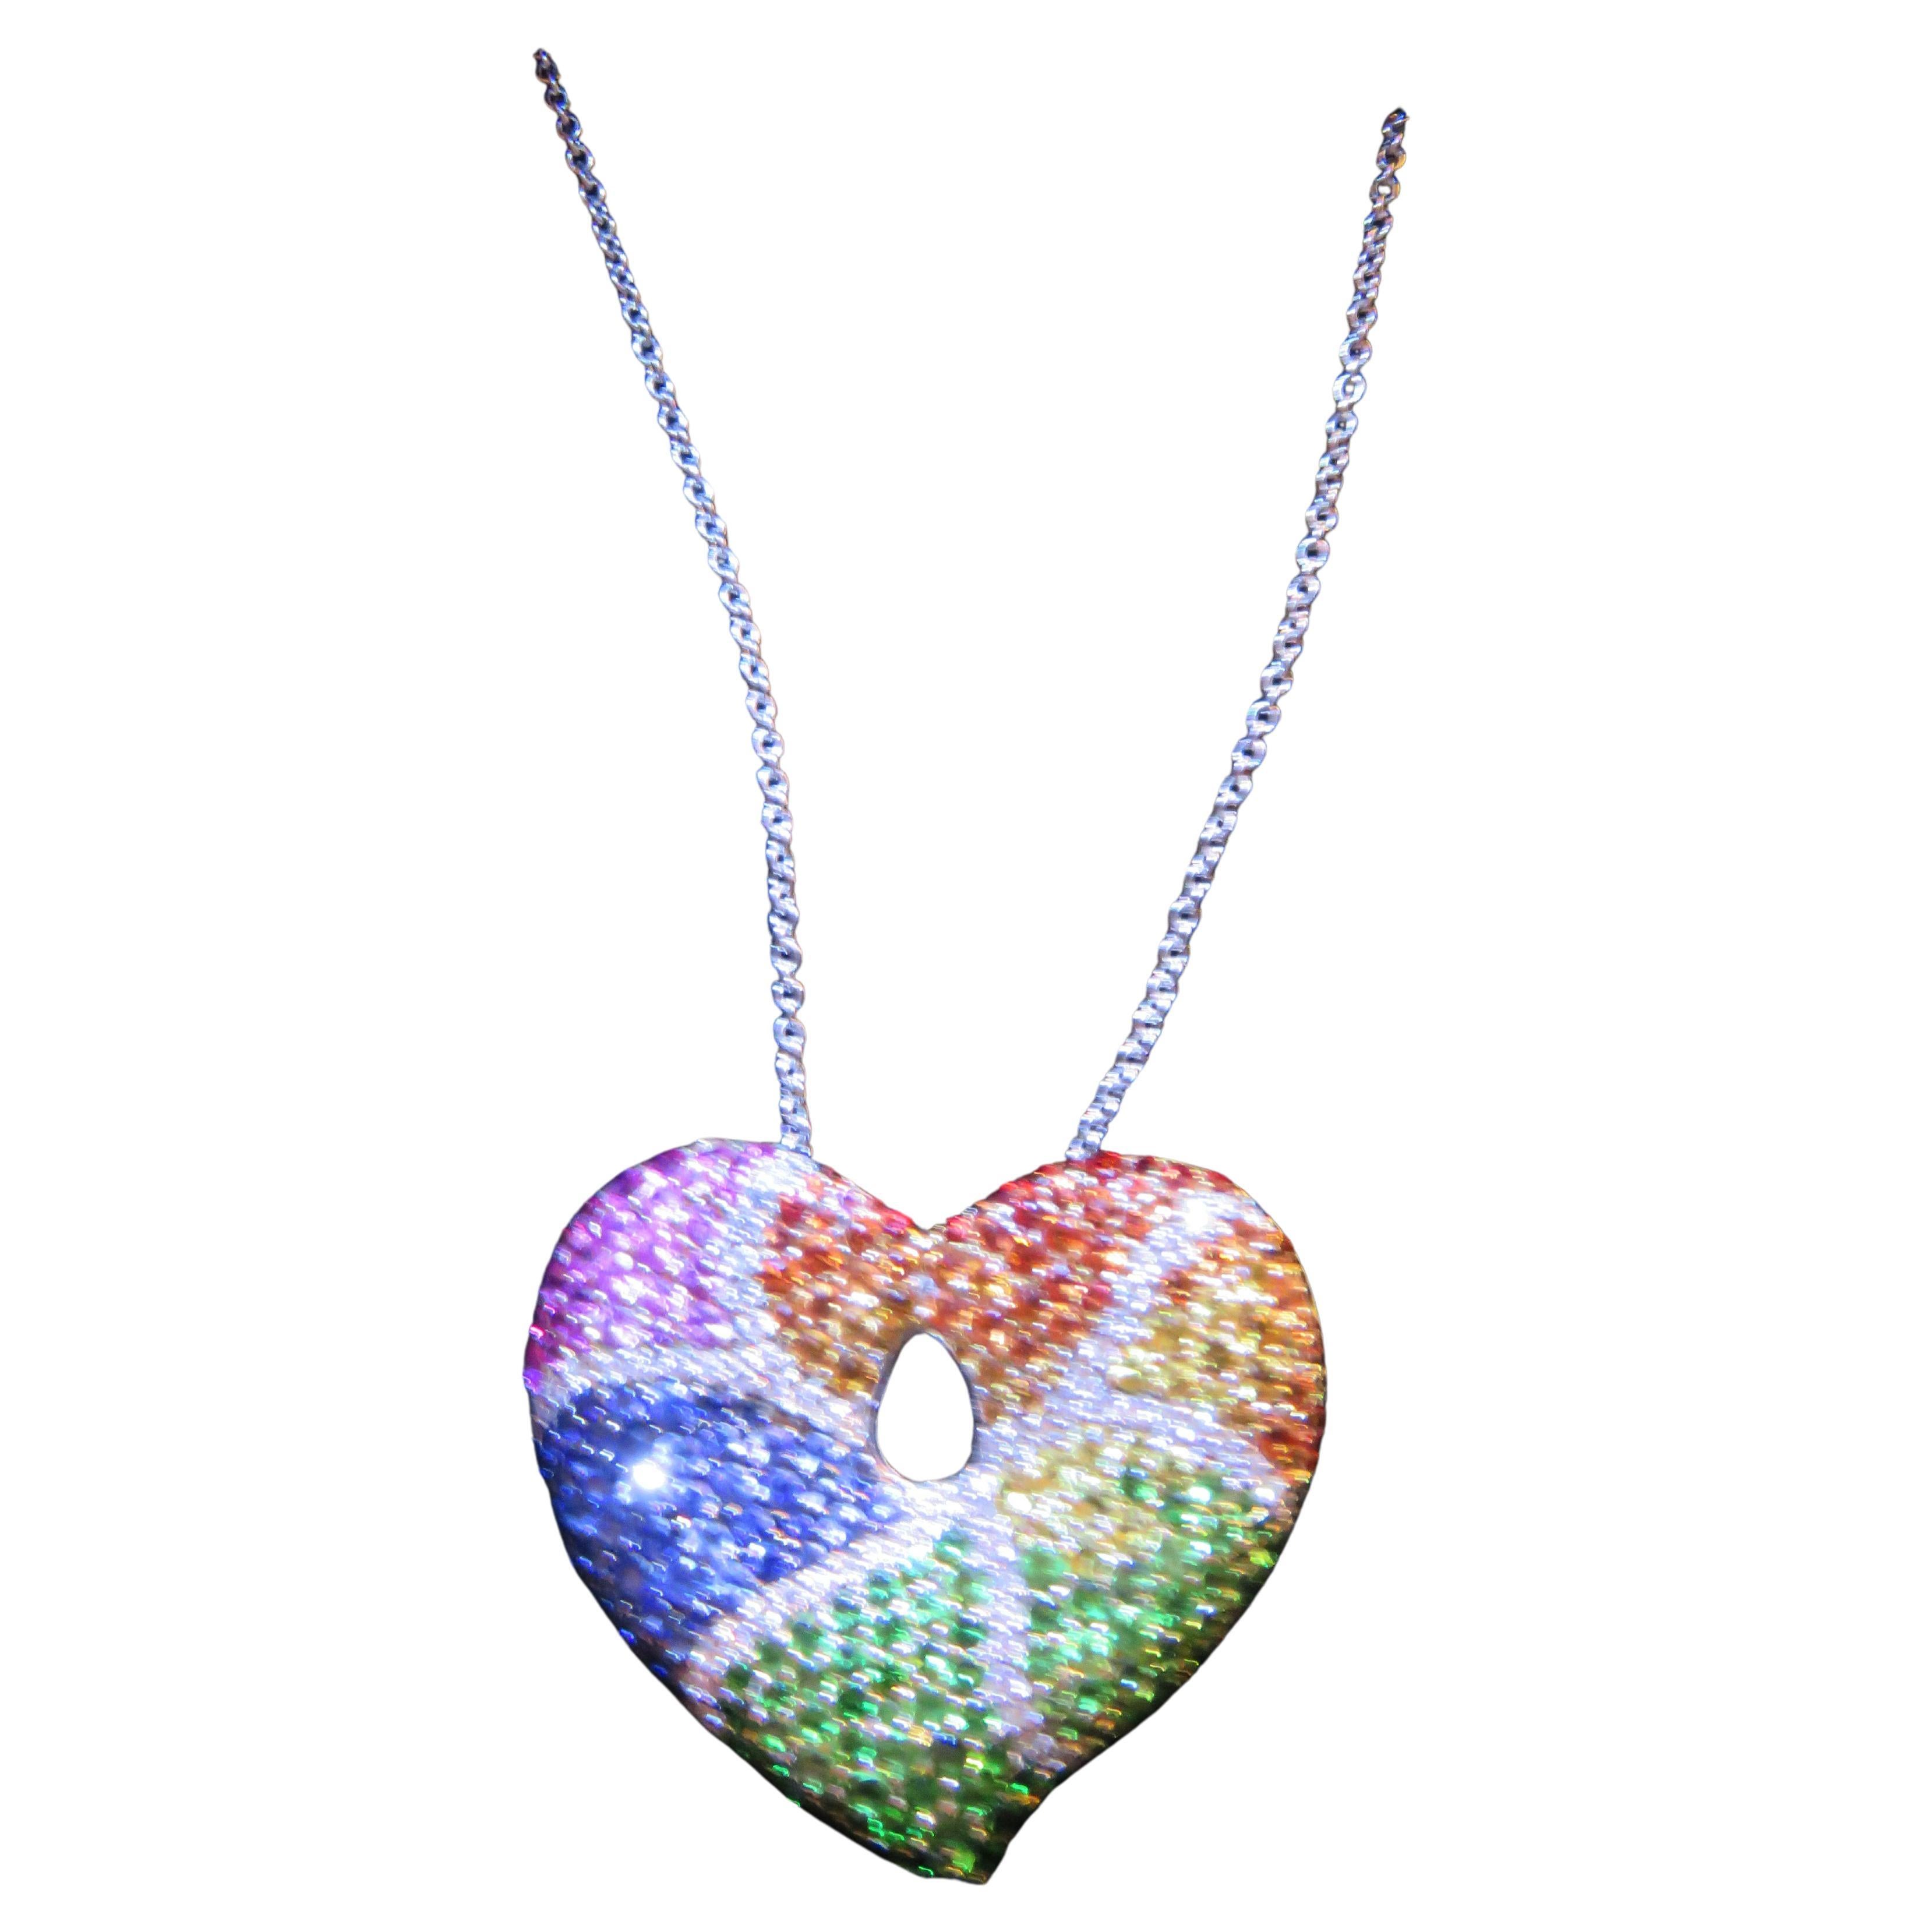 NWT $9, 600 Important 18KT Large 4CT Rainbow Sapphire Diamond Heart Necklace For Sale